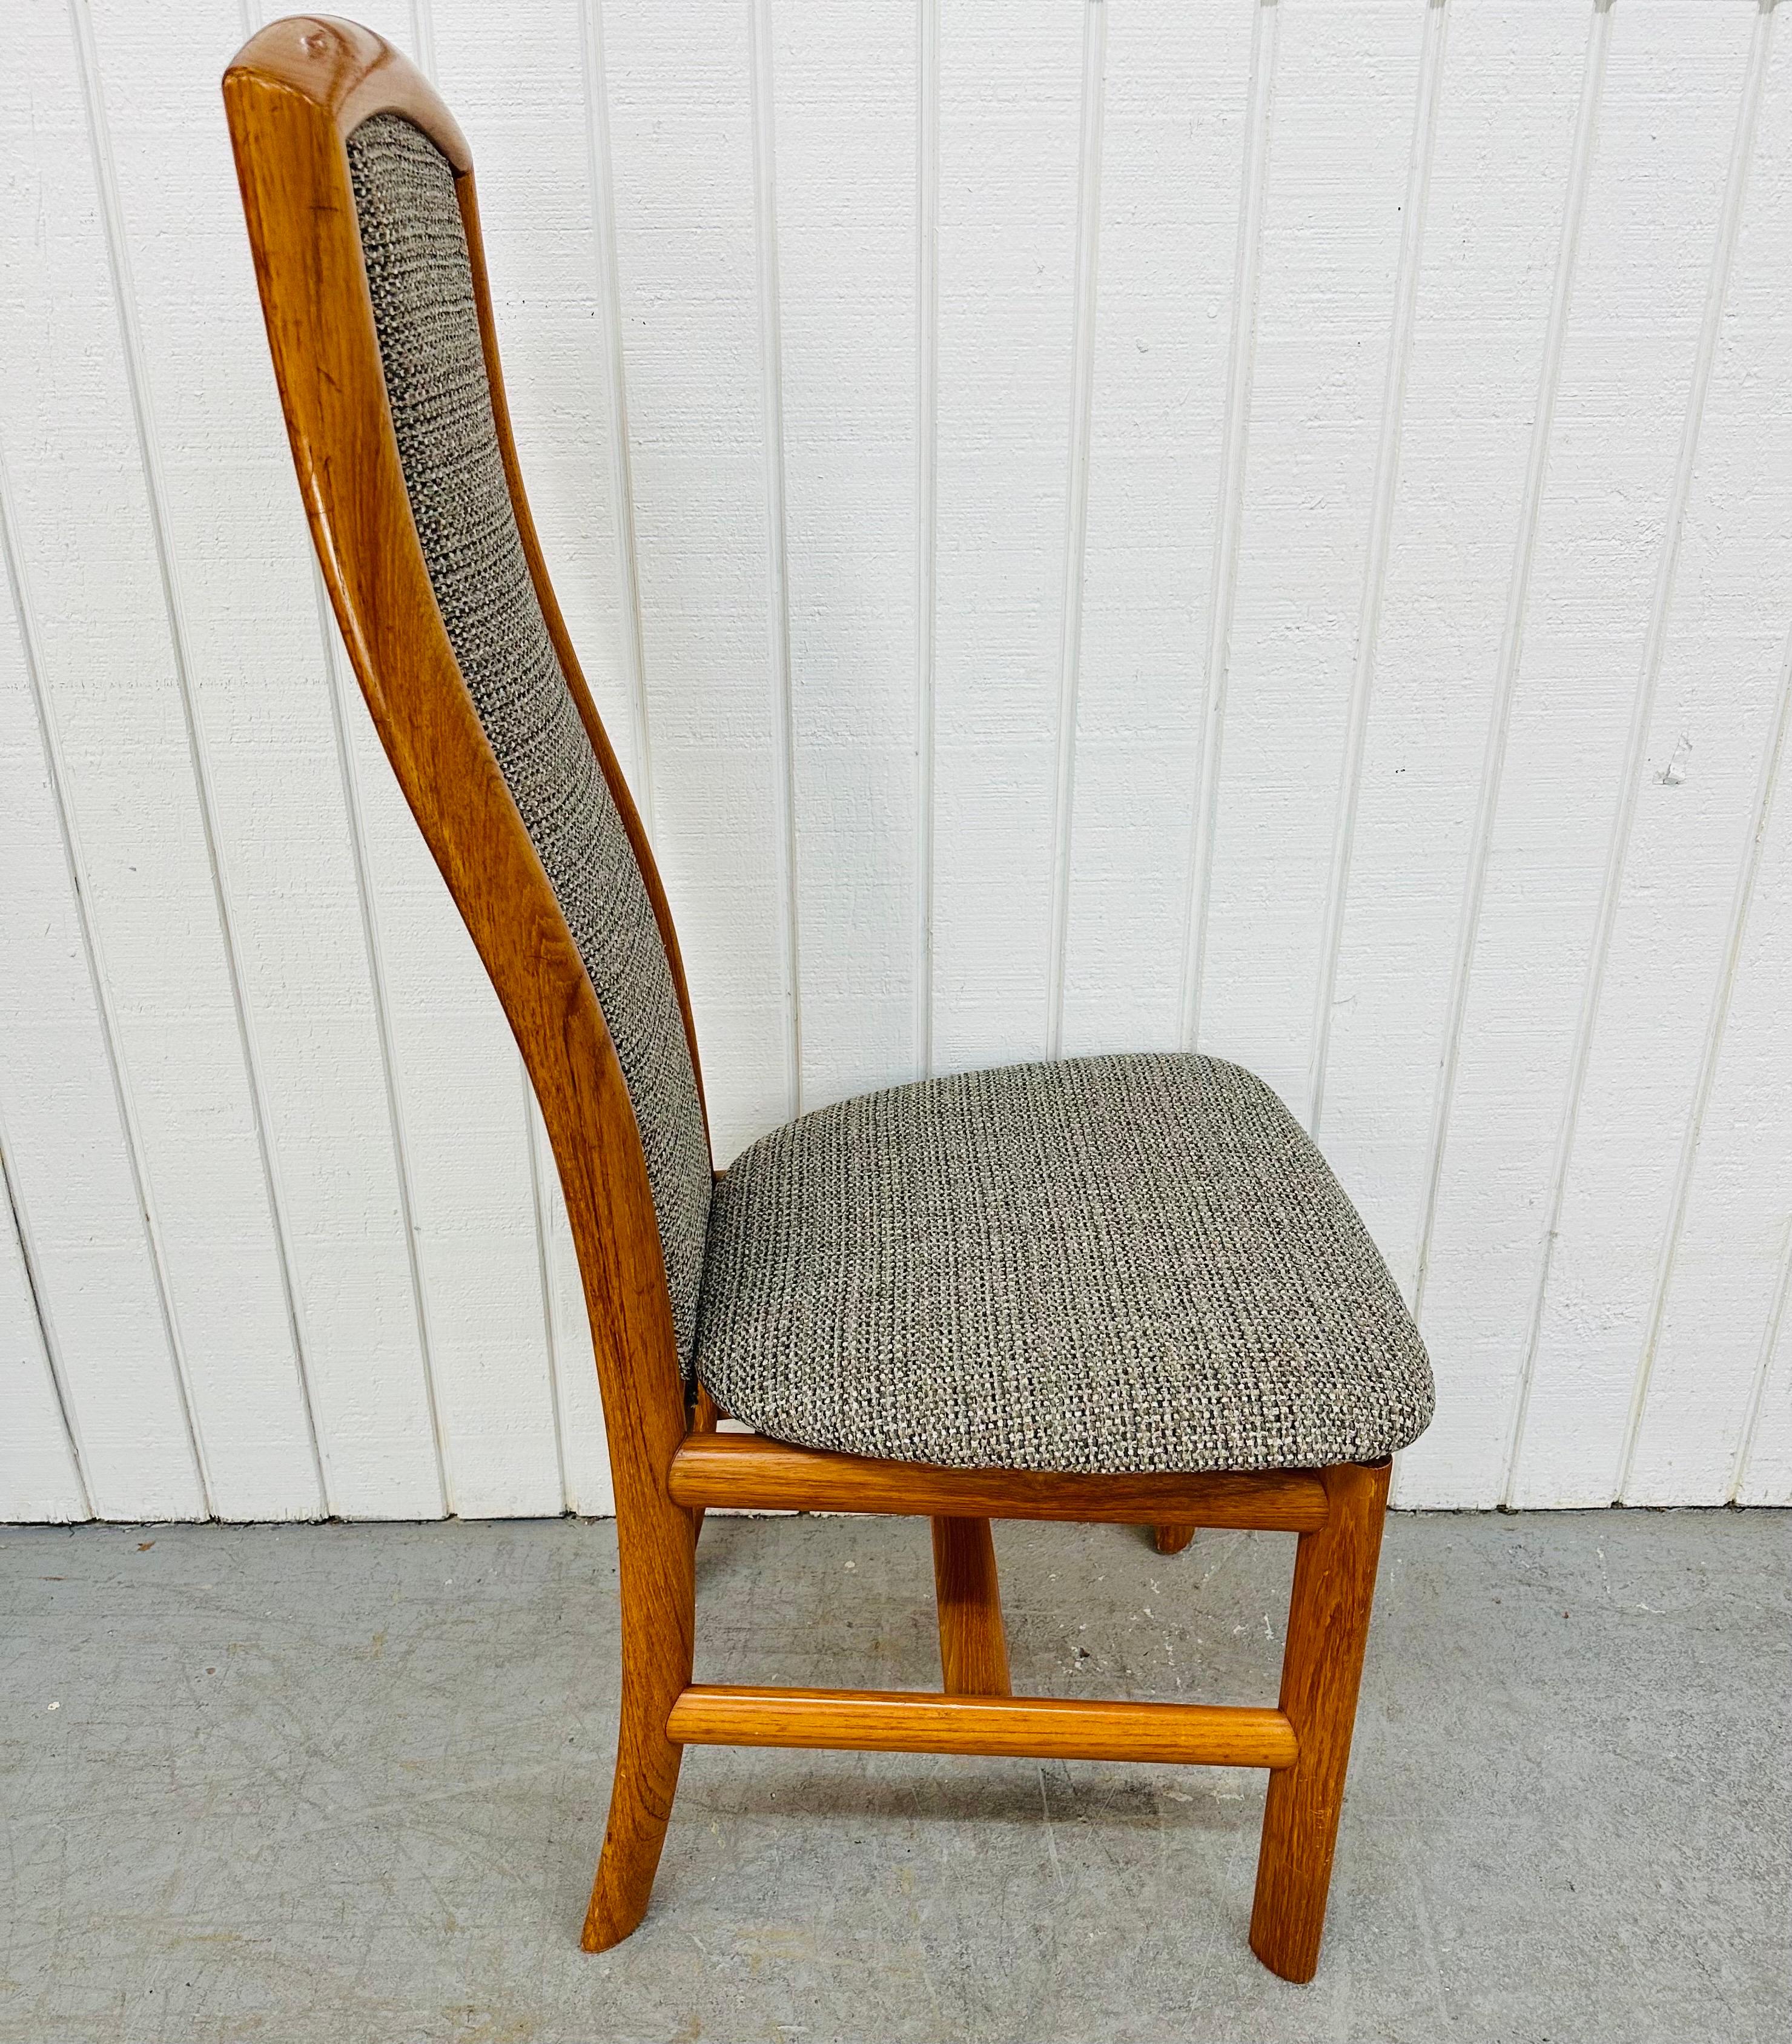 Upholstery Vintage Danish Modern Teak Dining Chairs - Set of 6 For Sale